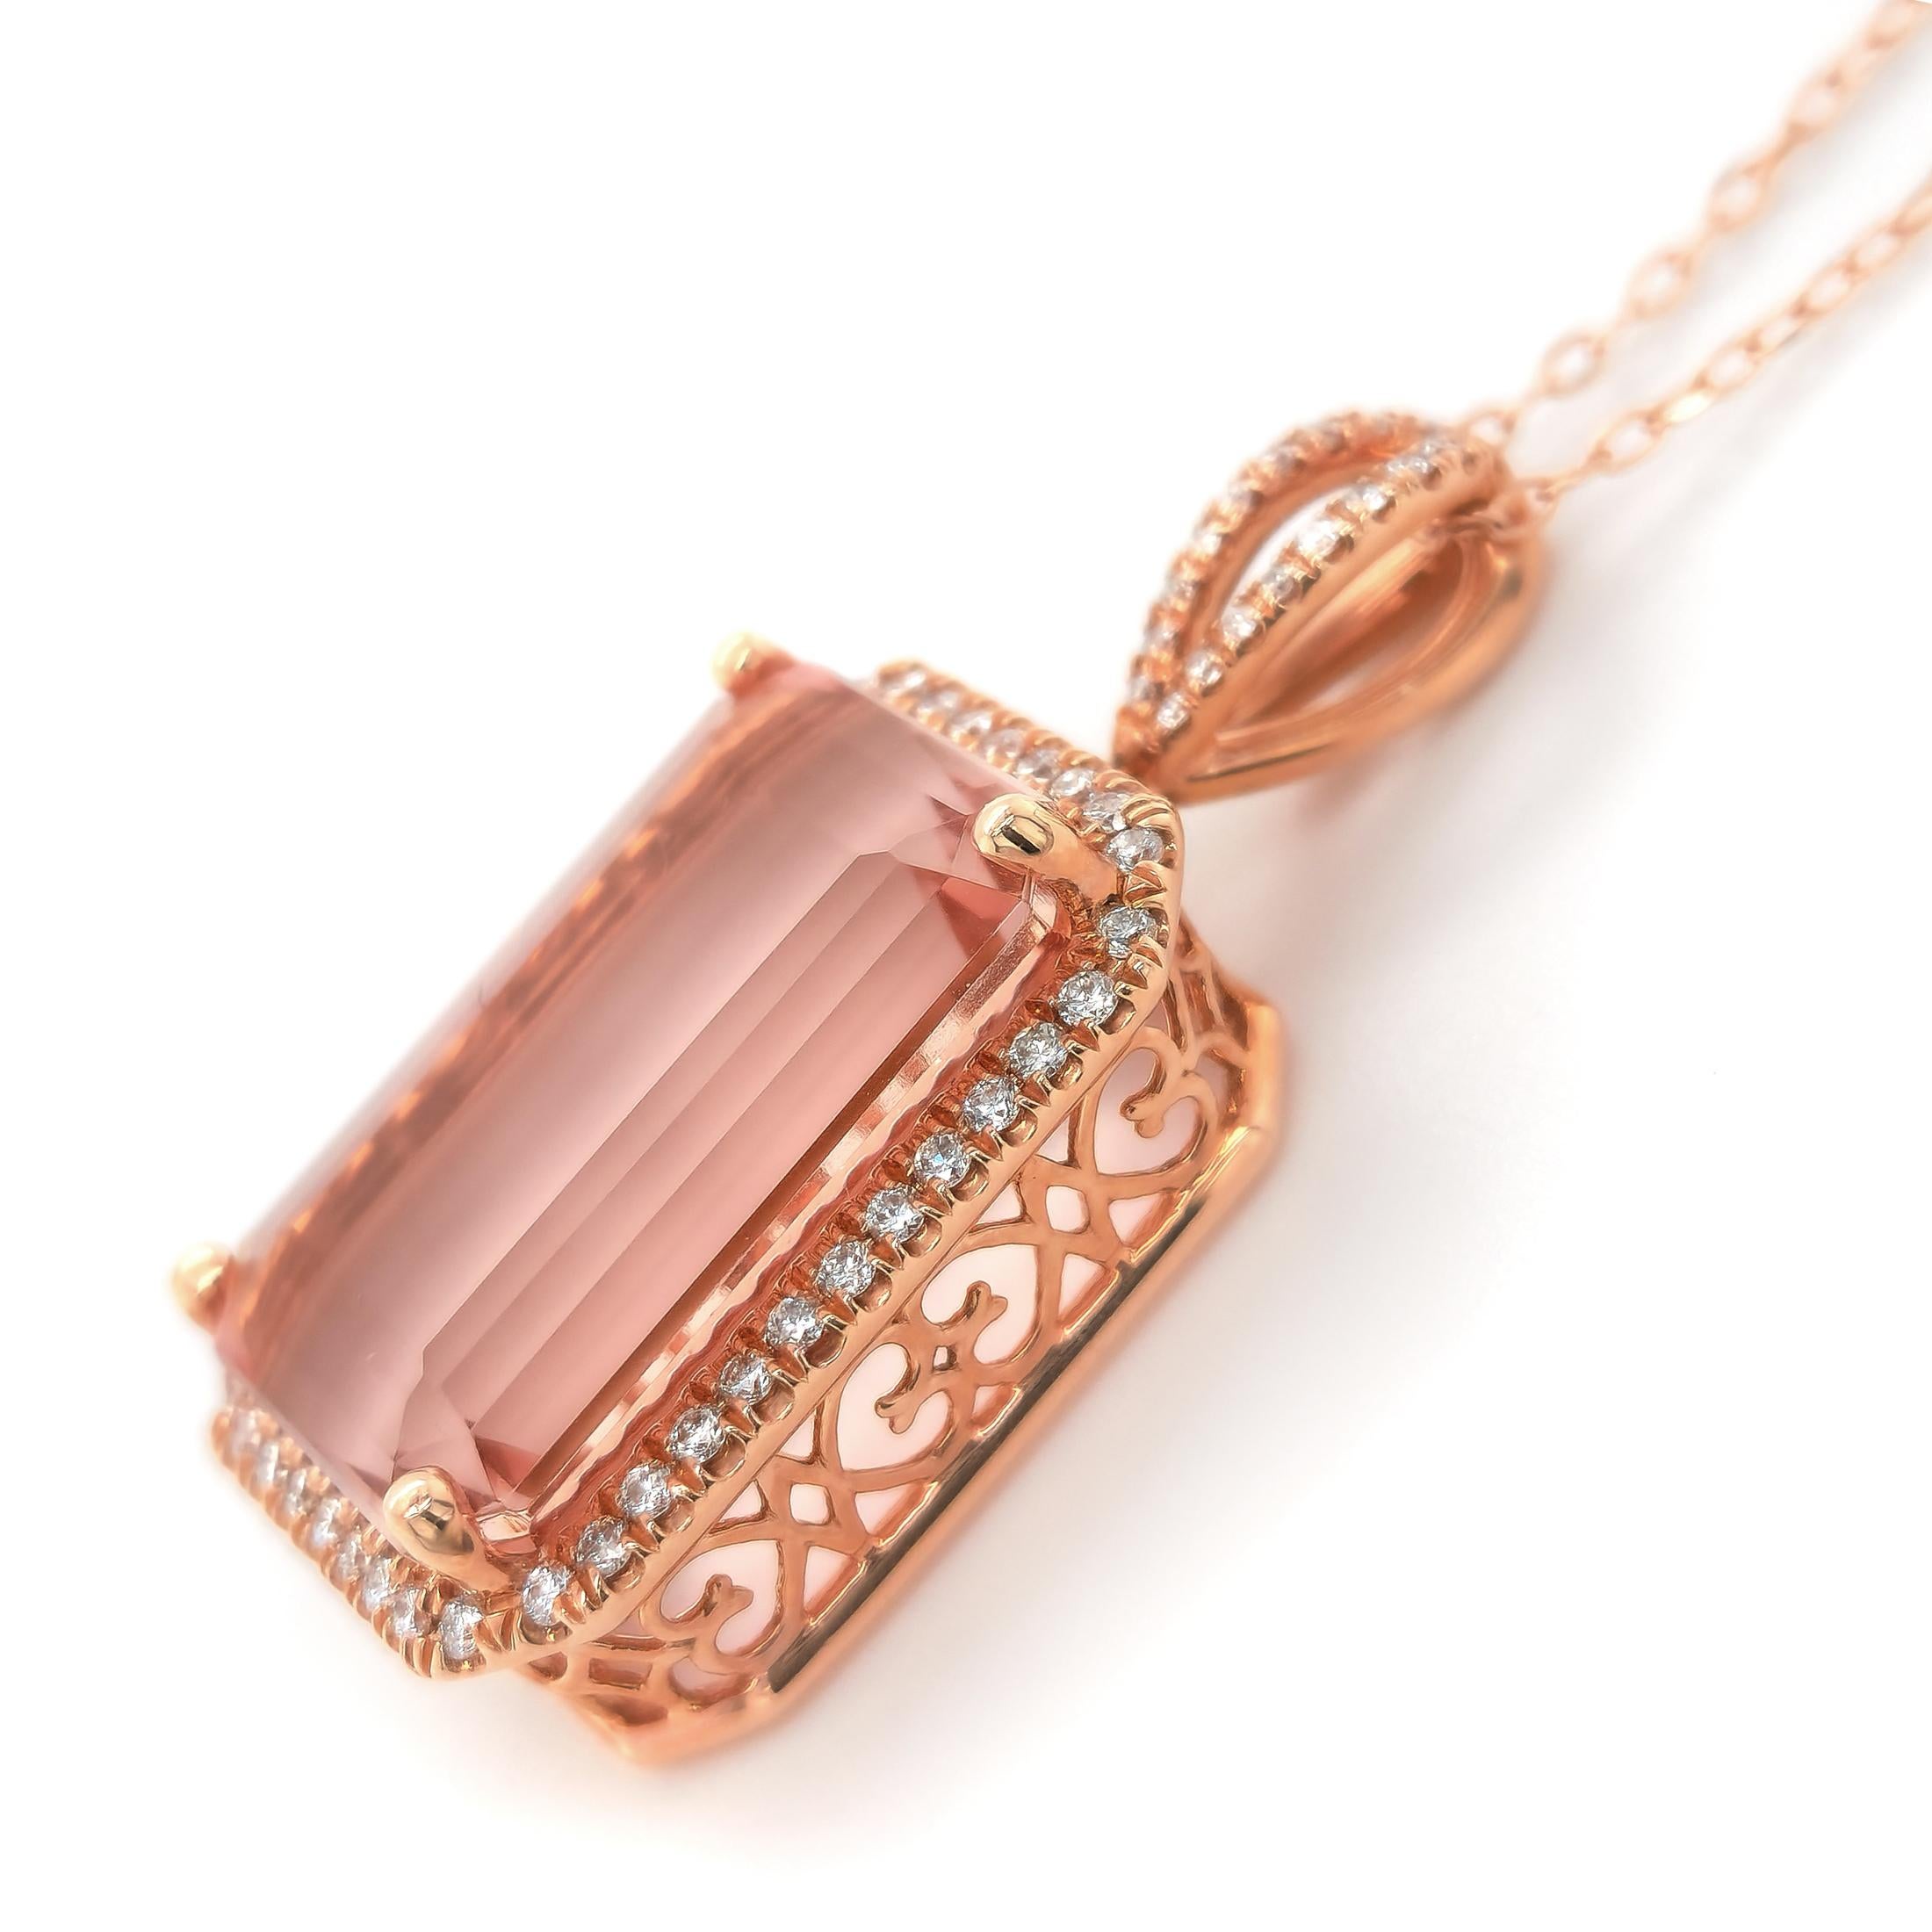 Lovely gemstone set in rose gold, this 14.64 carat mystical Morganite adds a touch of fresh sexiness to this pendant. Set in 14K Gold, there will be no denying the durability of this pendant paired with the everlasting salmon colored beryl. Although